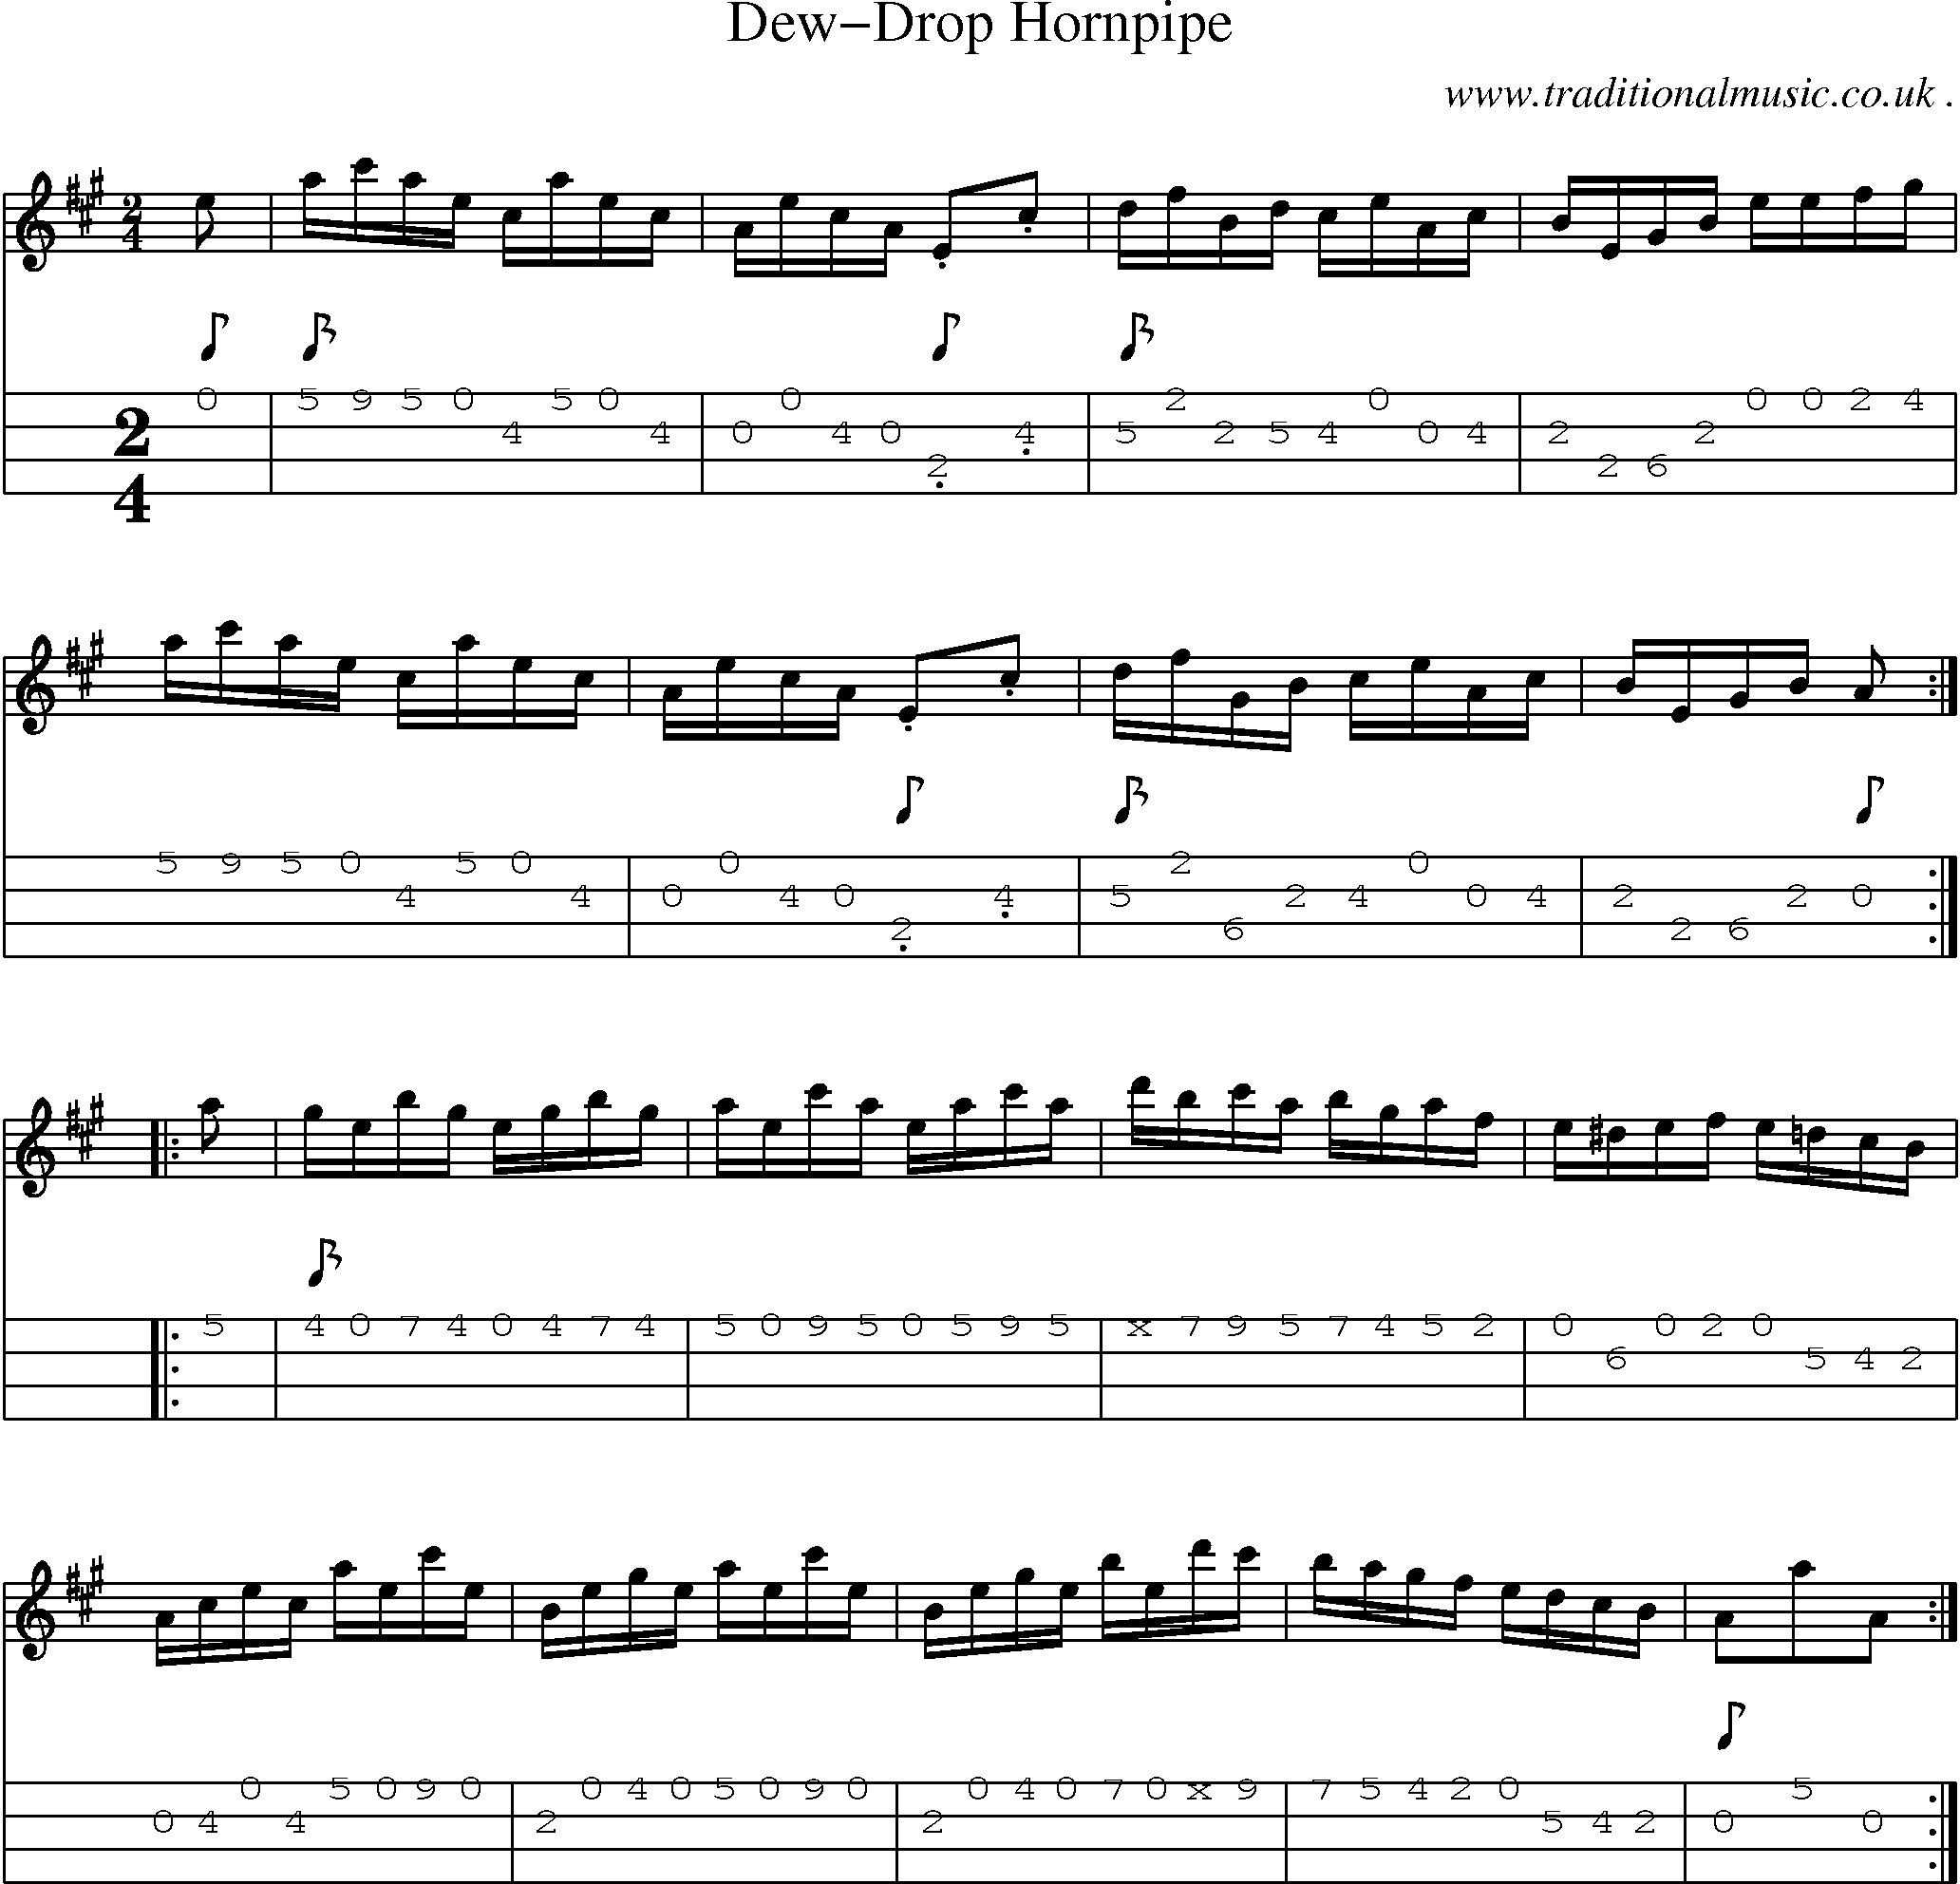 Sheet-Music and Mandolin Tabs for Dew-drop Hornpipe